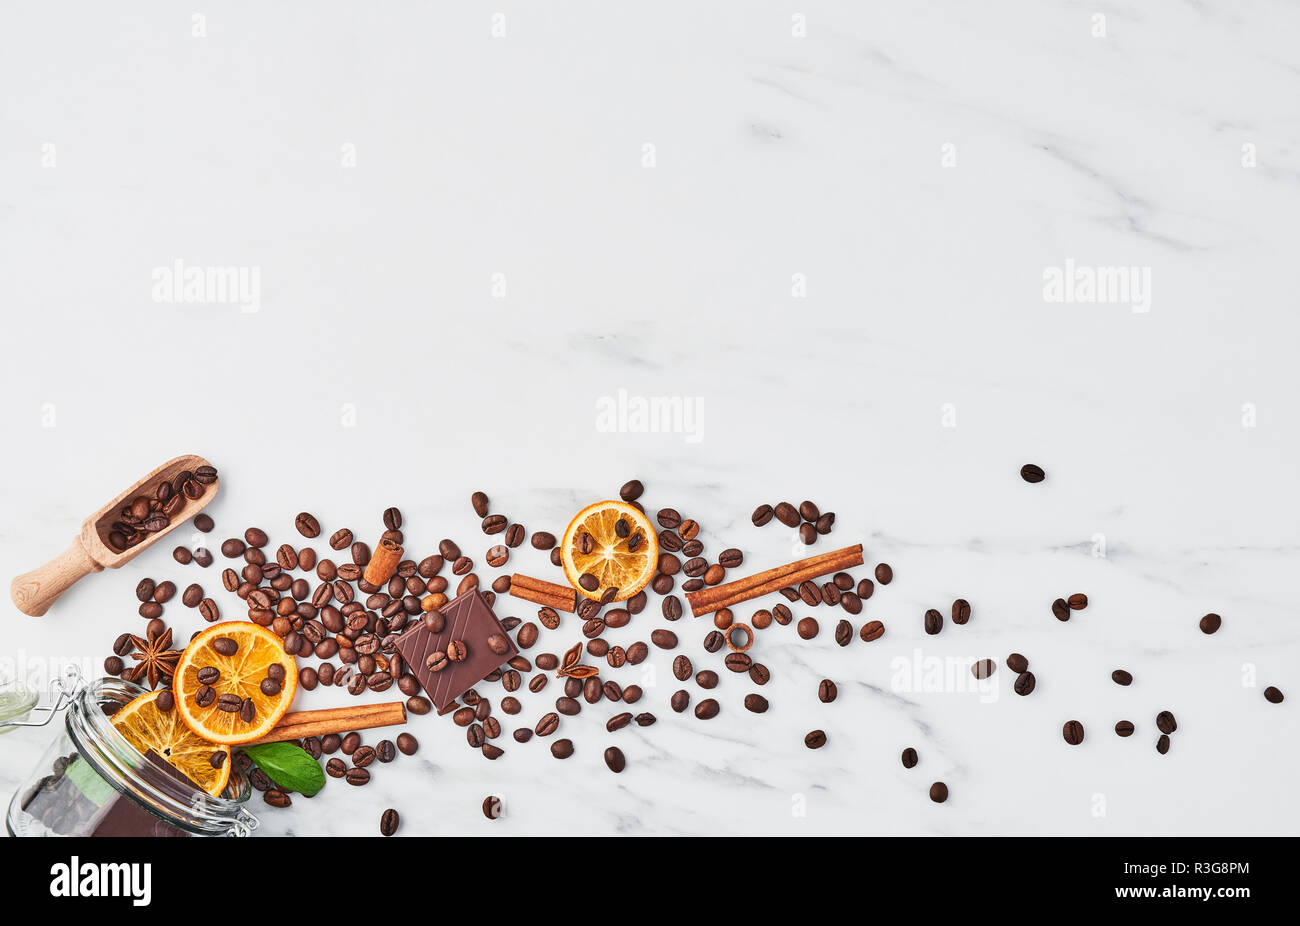 Coffee in glass jar with beans, chocolate, dried oranges, anis and cinnamon sticks on white marble background. Concept of coffee with different spices Stock Photo